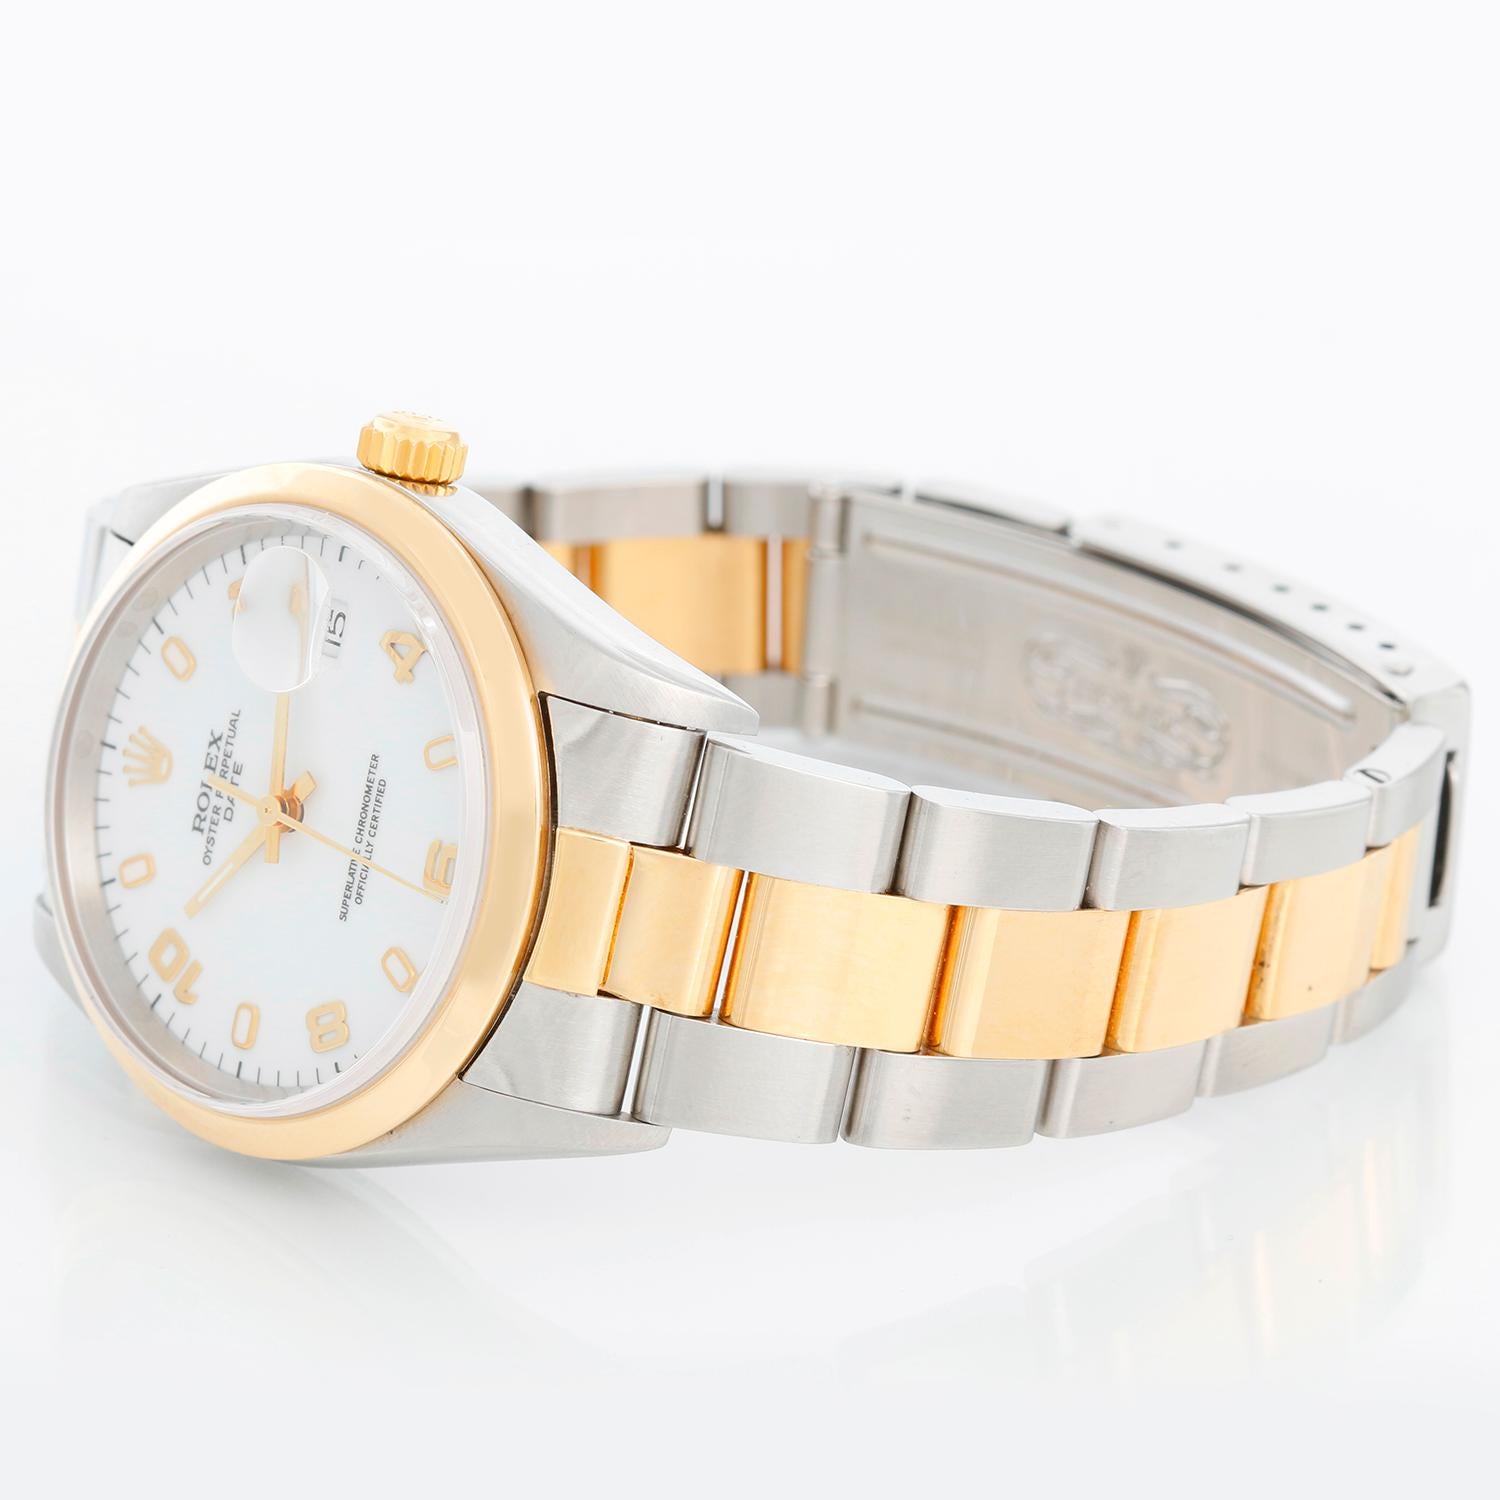 Rolex Date Men's 2-Tone Steel & Gold Watch 15203 - Automatic winding, 31 jewels, Quickset, sapphire crystal. Stainless steel case with 18k yellow gold smooth bezel (34mm diameter) Original Rolex finish. White dial with gold Arabic numerals .